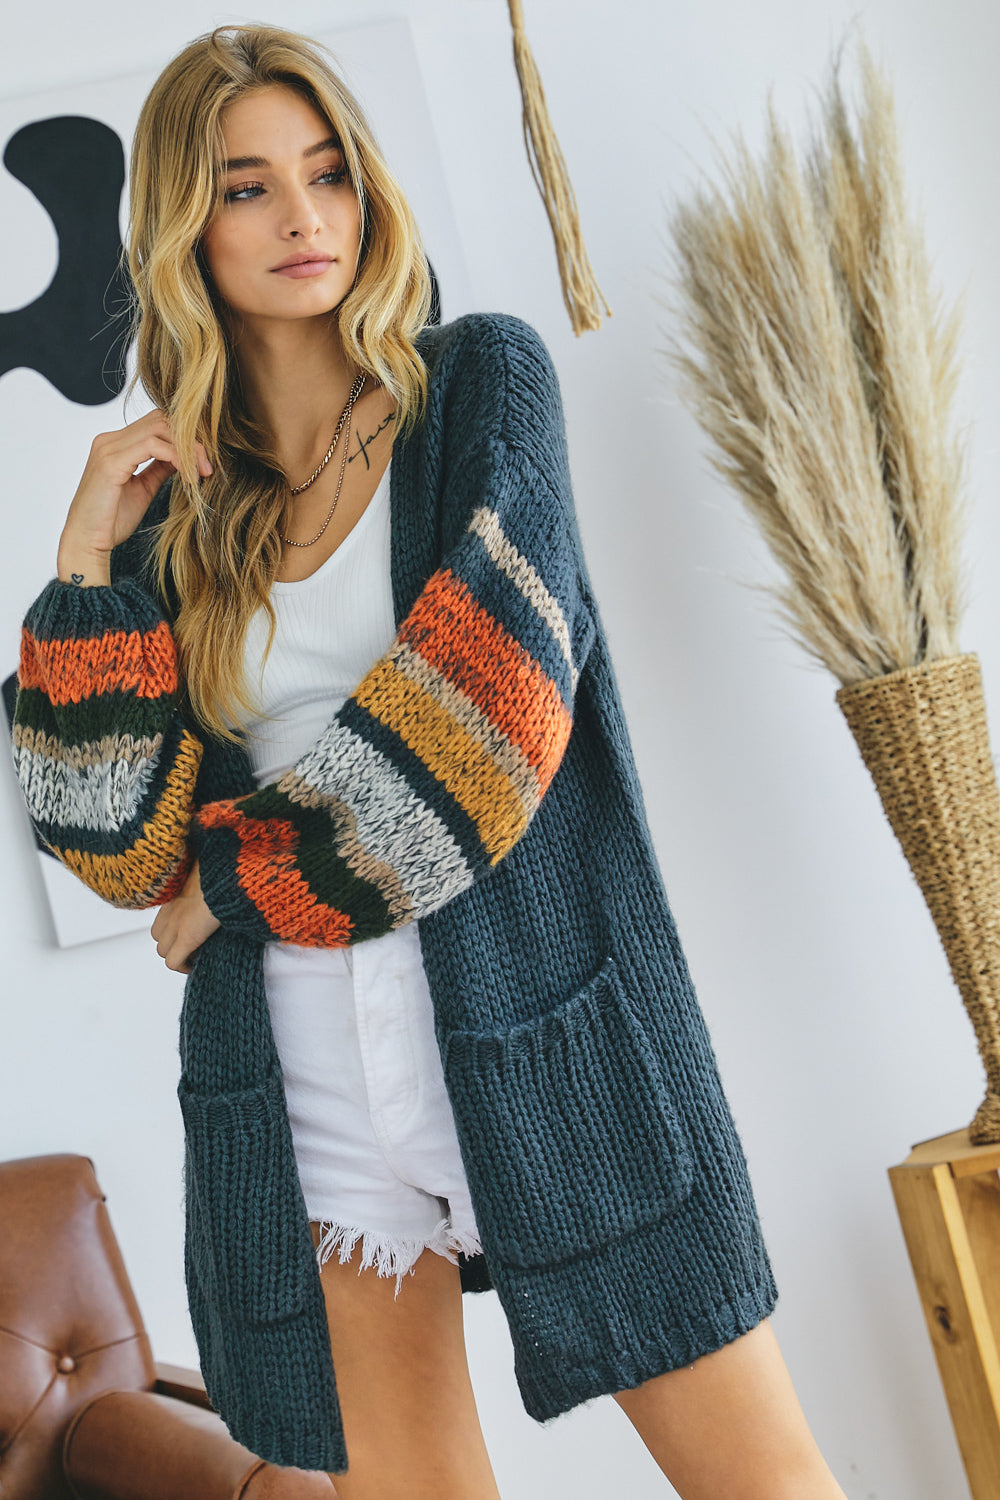 Davi&Dani Open Front Sleeve Striped Cozy Cardigan - Charcoal Grey available at The Good Life Boutique